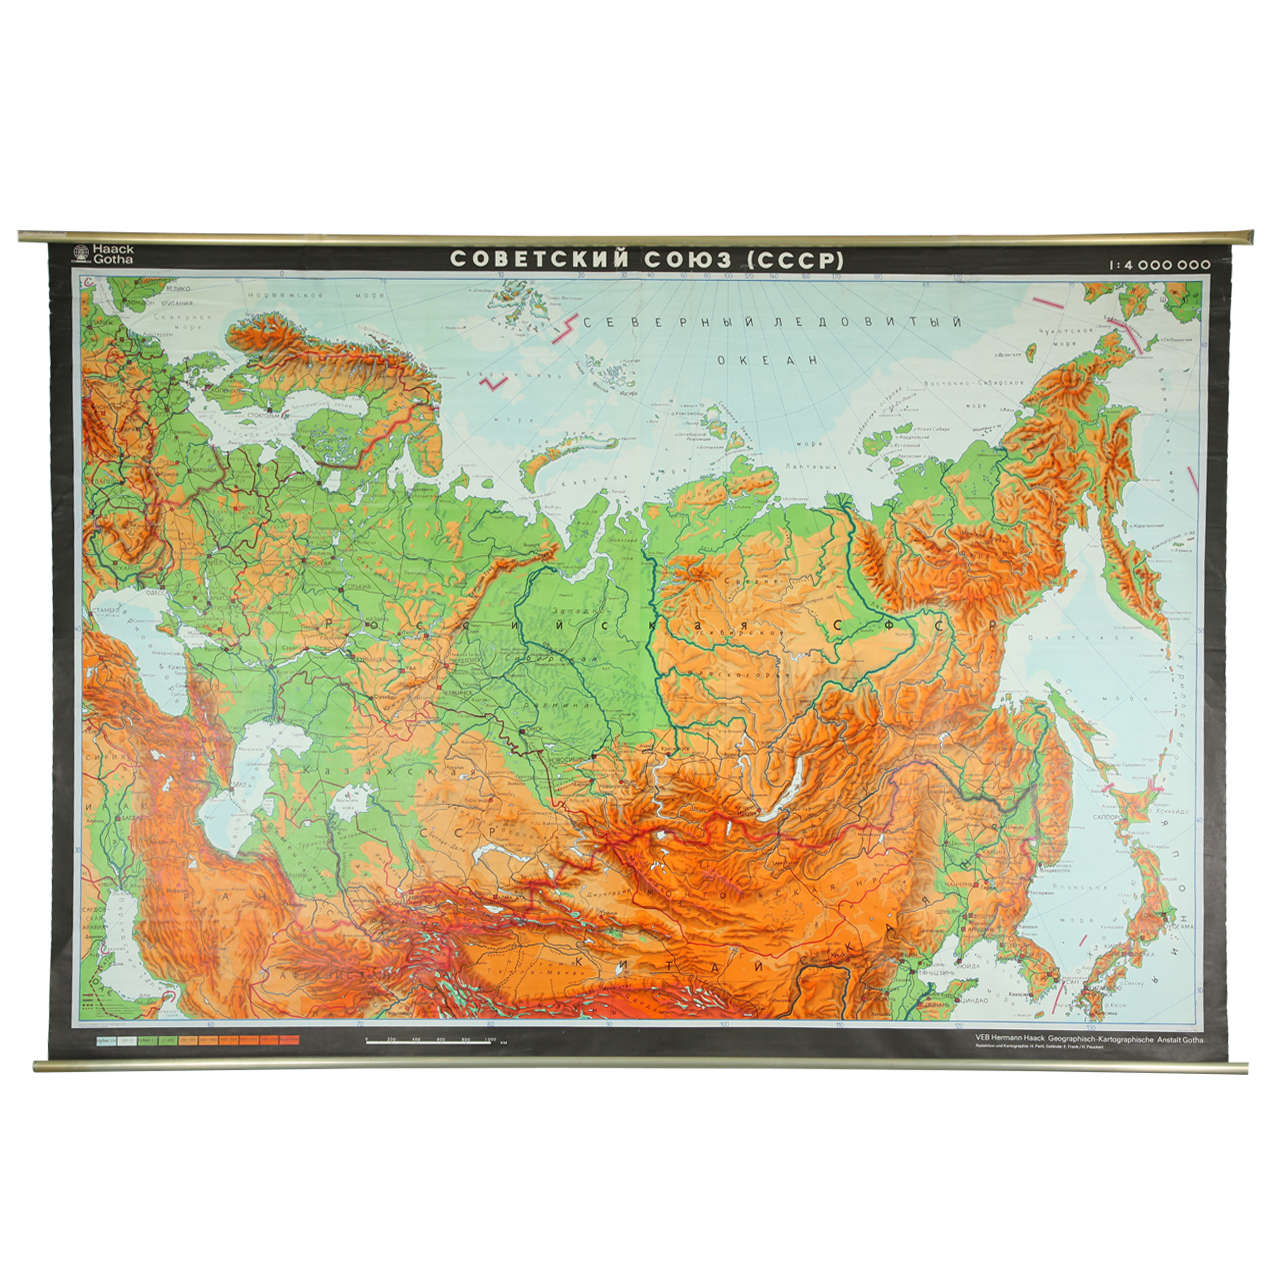 1984 German Map of the USSR